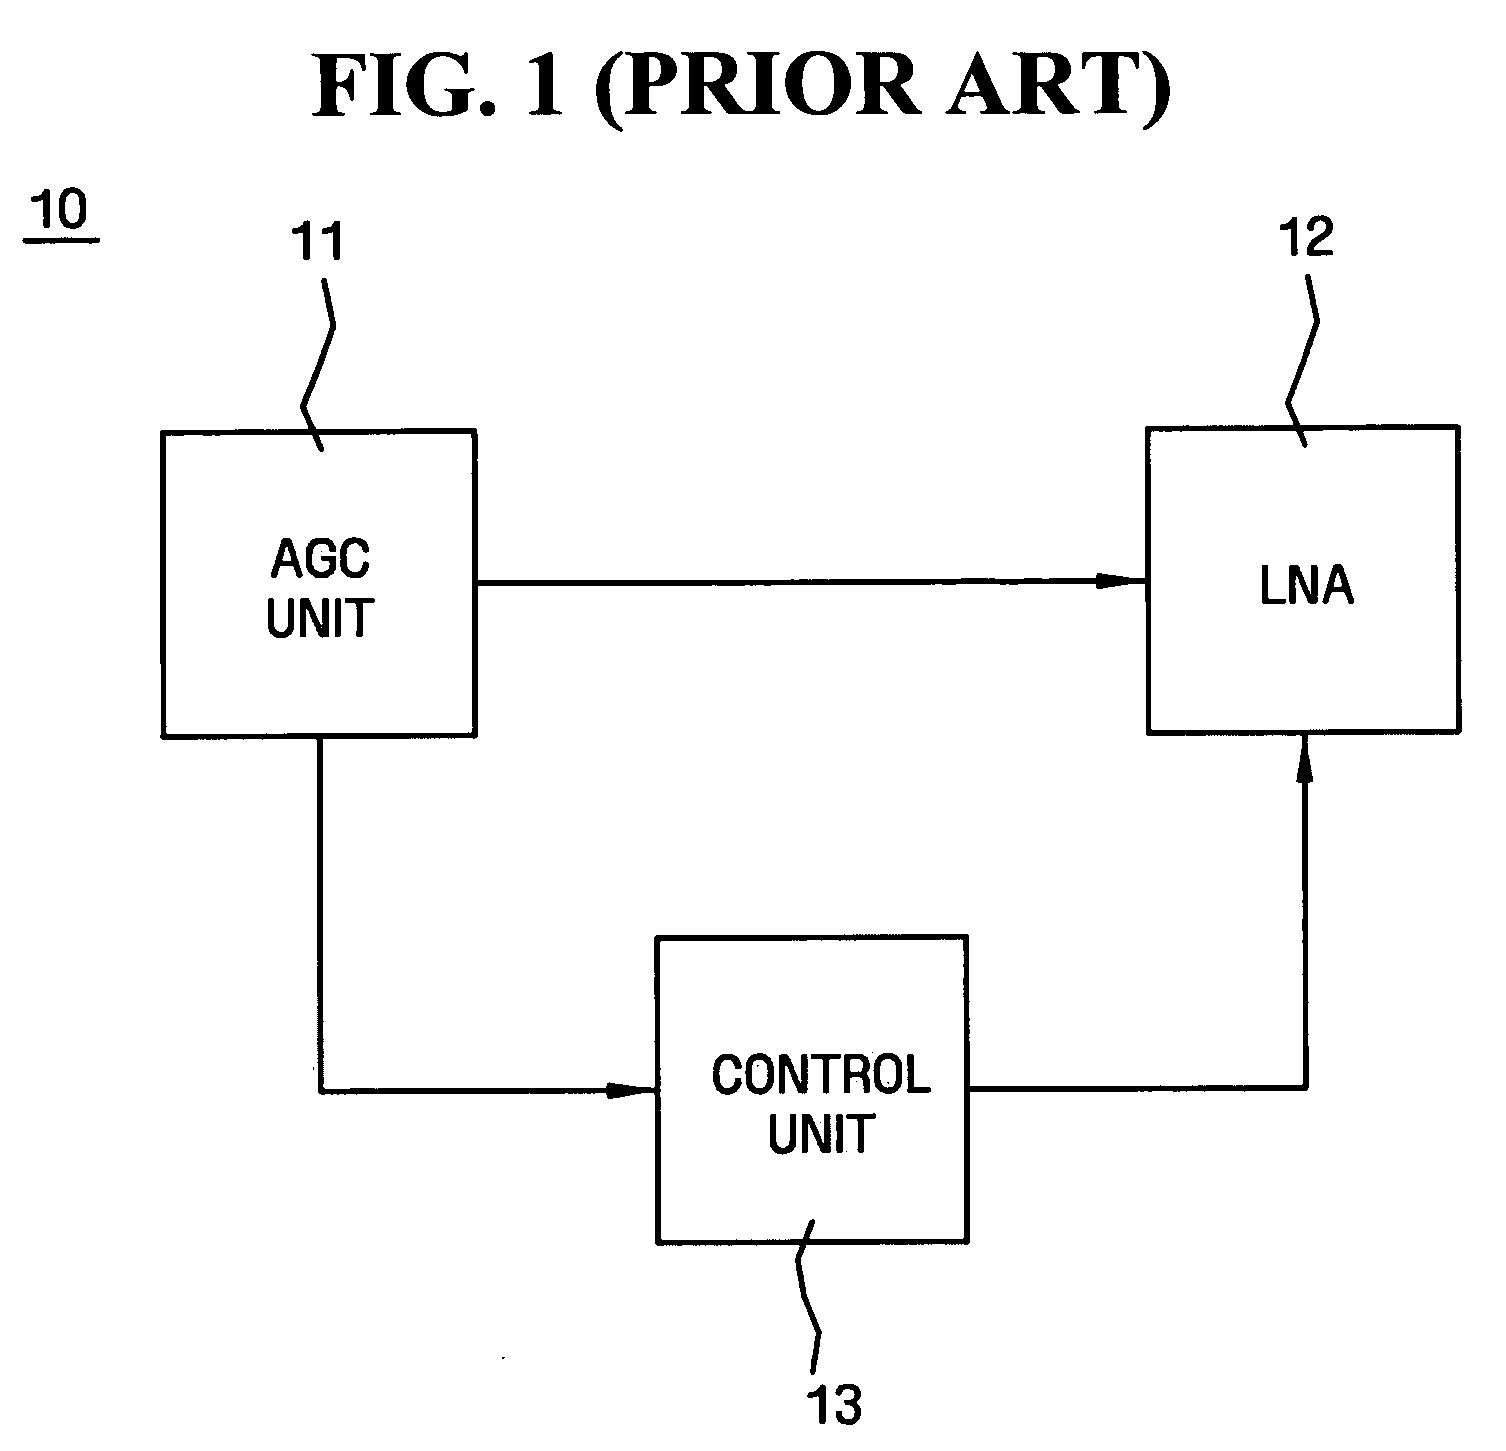 Signal amplifying apparatus and method